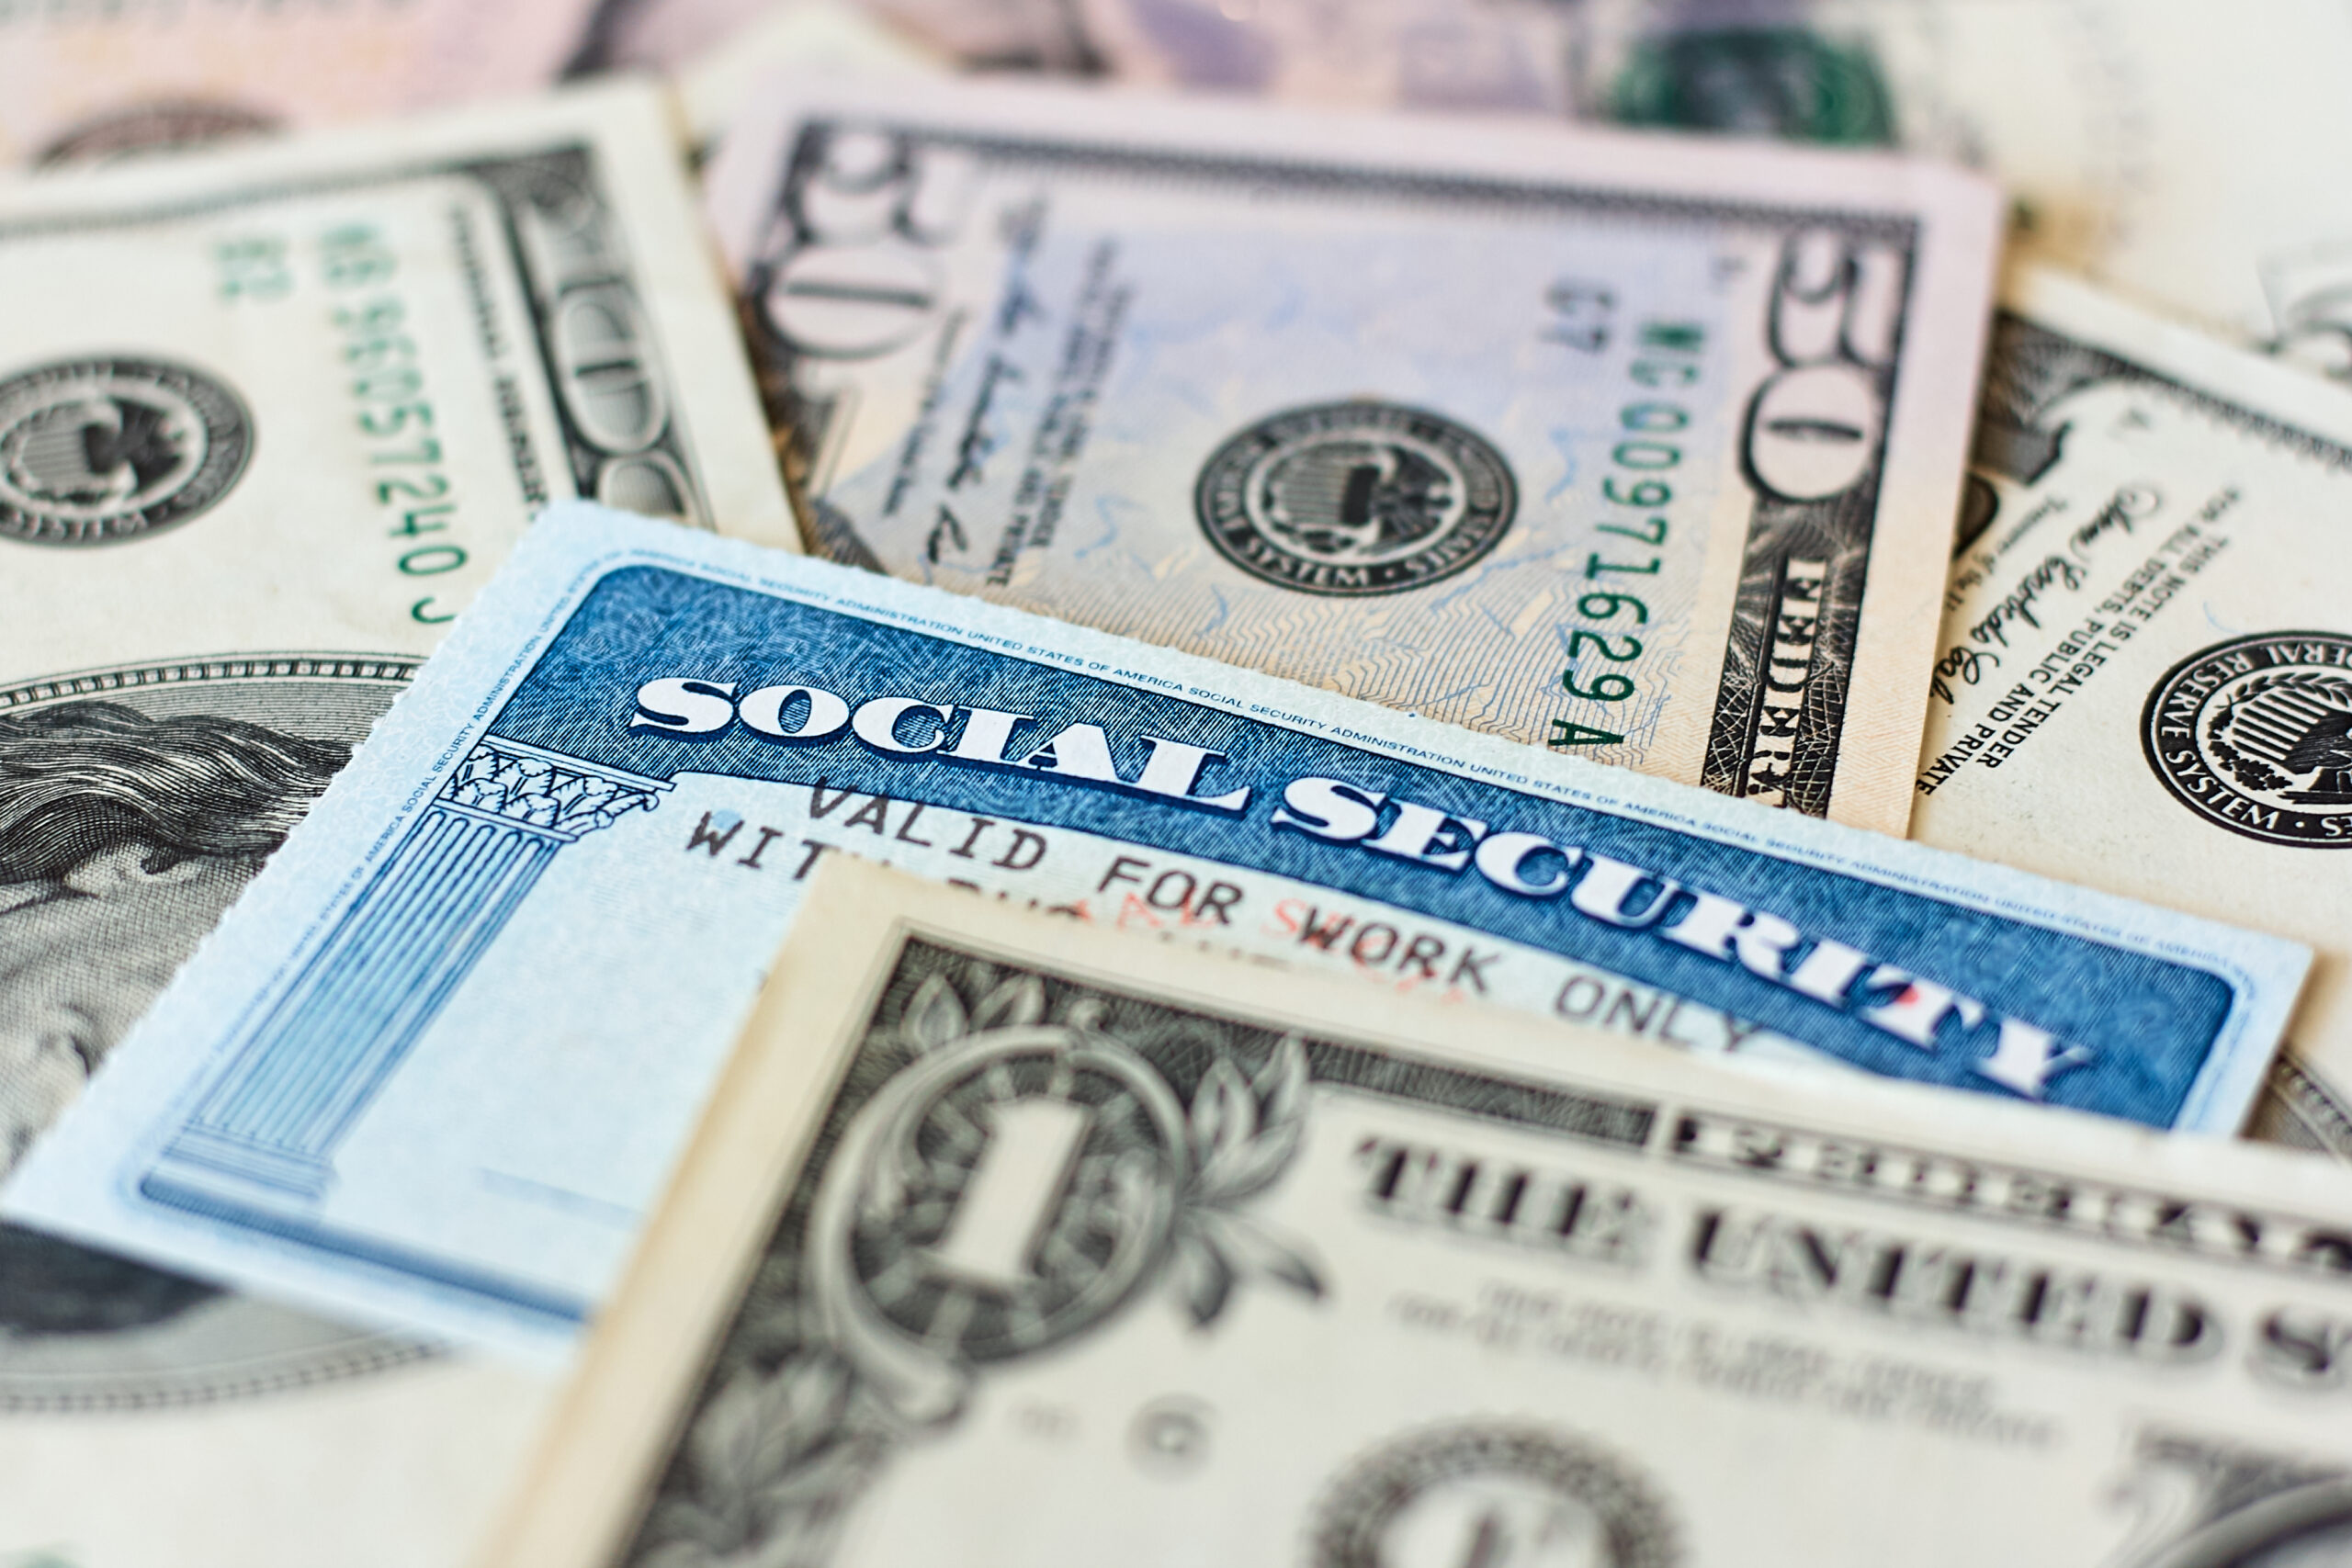 social-security:-those-who-will-receive-payments-of-up-to-$4,873-dollars-in-10-days